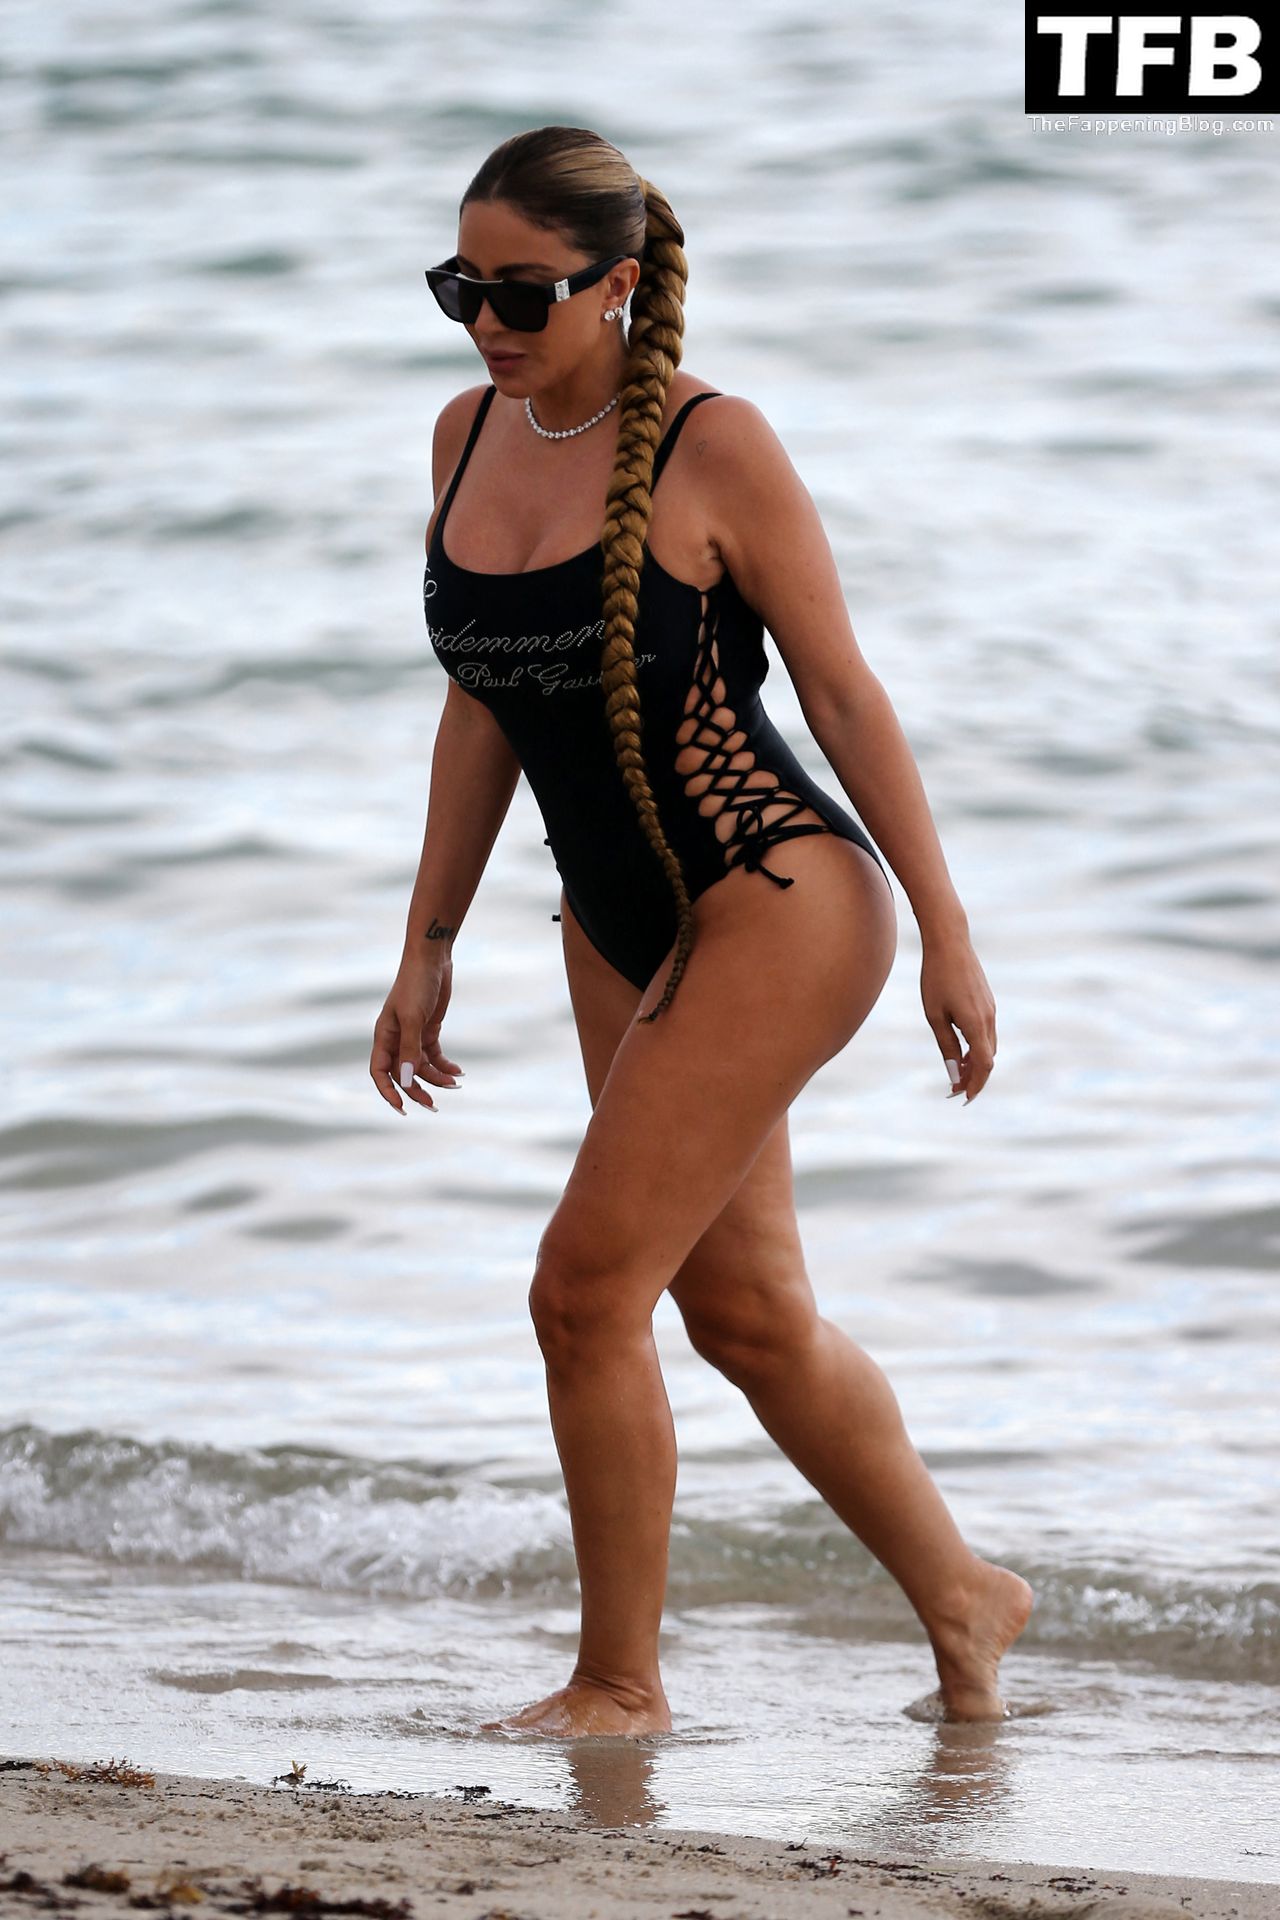 Larsa Pippen Looks Amazing in a Revealing Black Swimsuit (26 Photos)